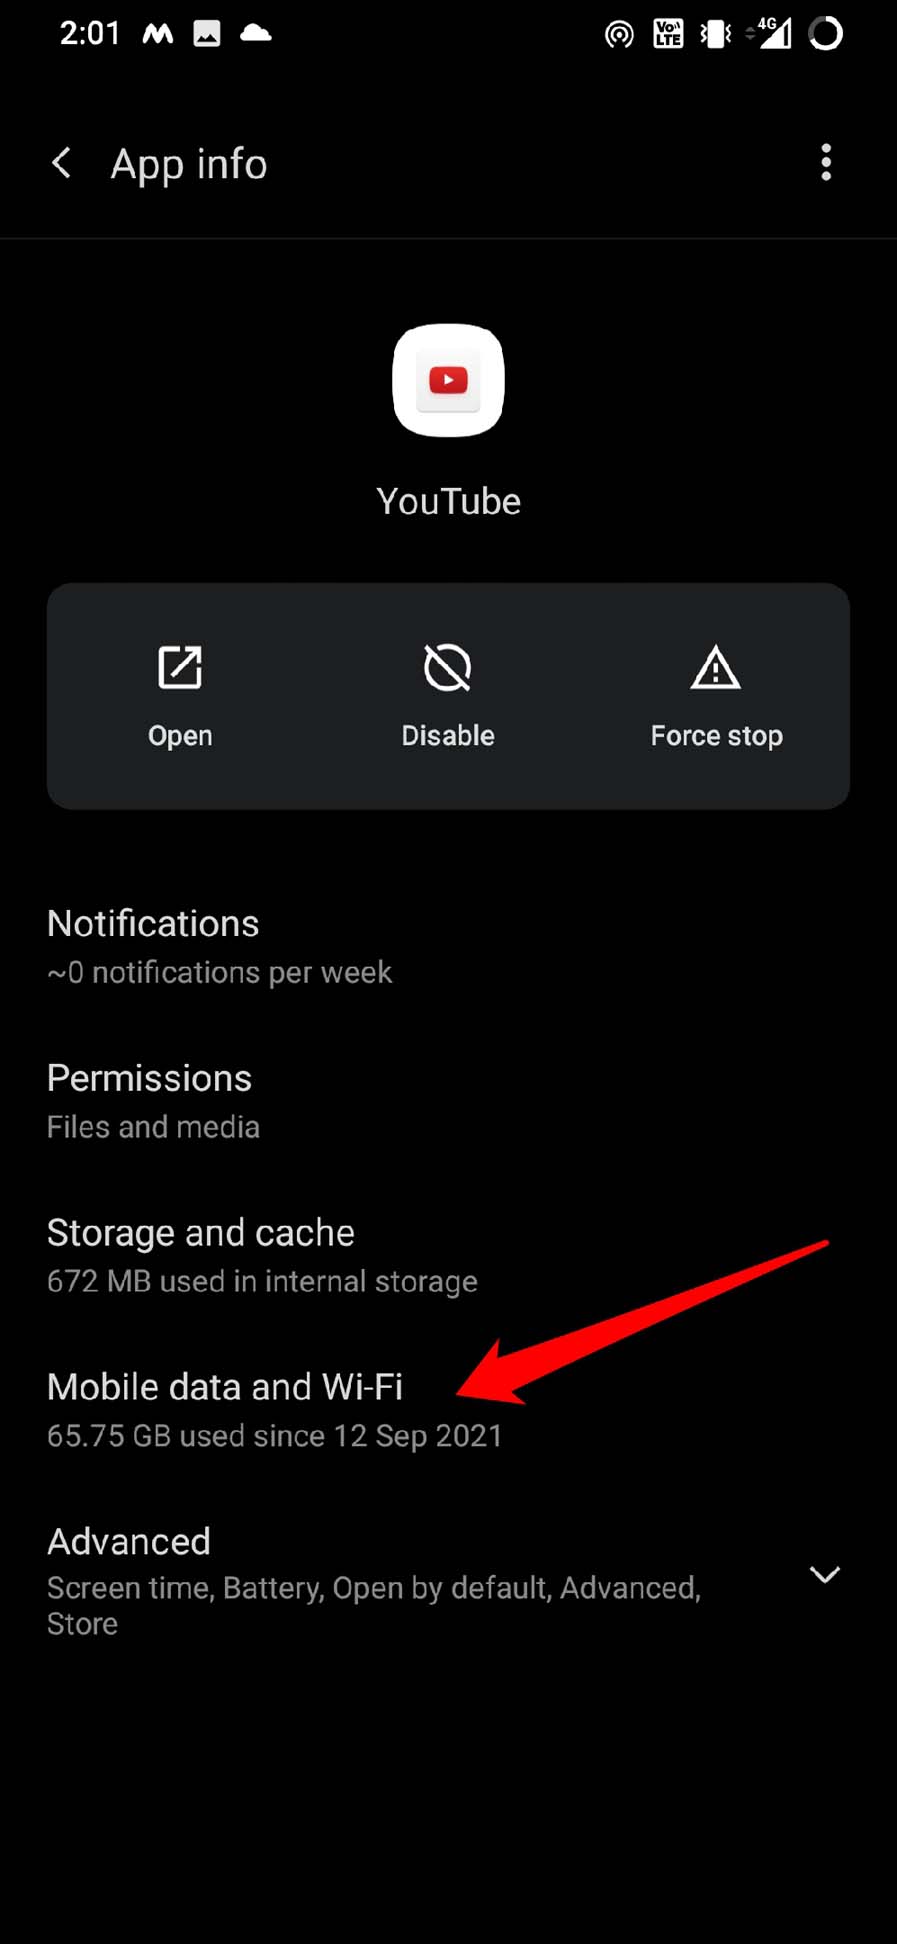 mobile data and WiFi settings for YouTube